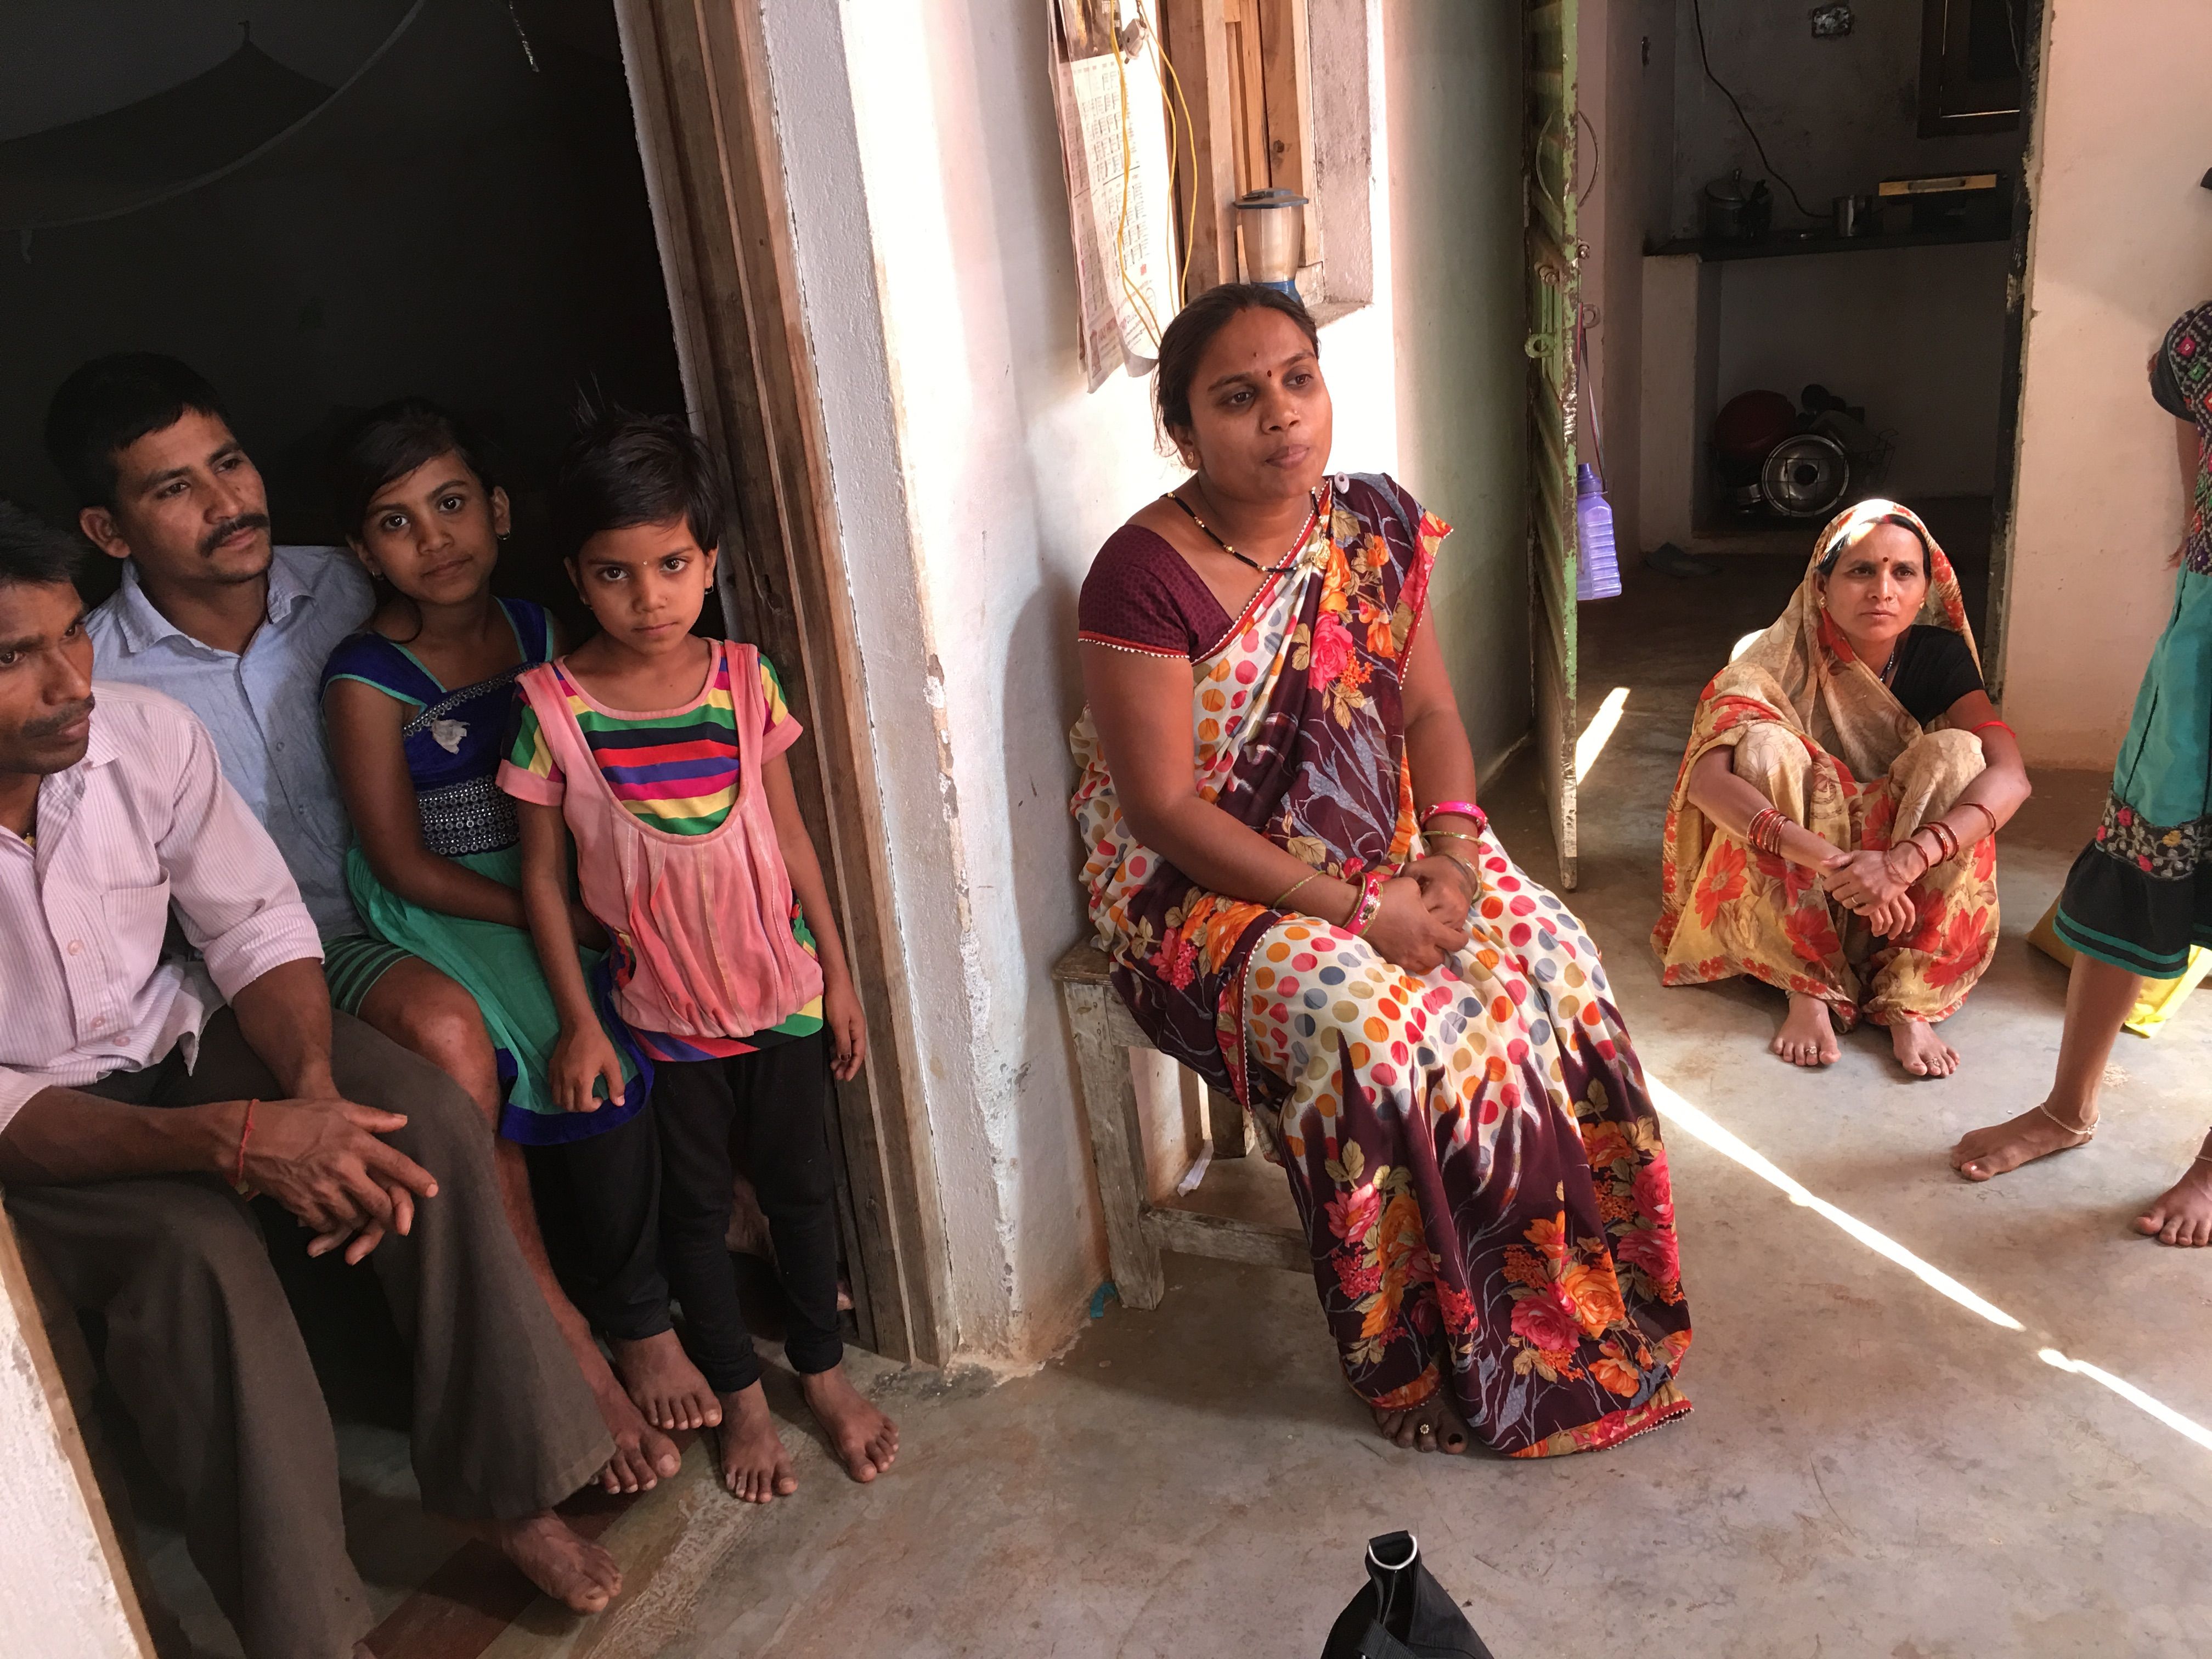 Pinki Sahu sits in a chair surrounded by family members. Pinki lost her sister, Sunita, when she died due to a botched sterilization procedure at a government-run camp in Chhattisgarh. Image by Hannah Harris Green. India, 2018.